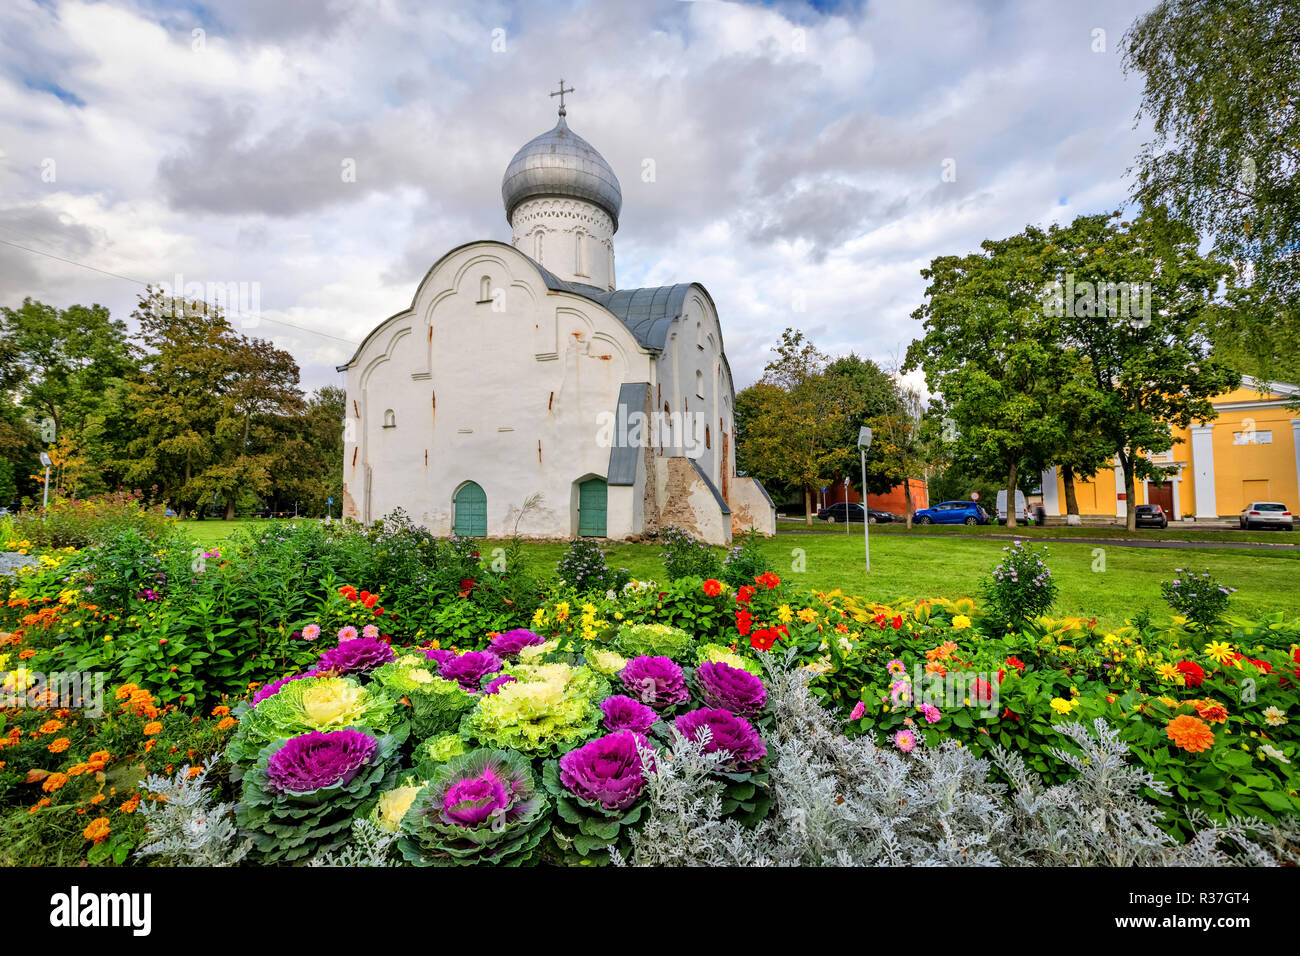 Historic Blasius Church built in 1407 with colorful flowerbed on foreground in Veliky Novgorod, Russia Stock Photo